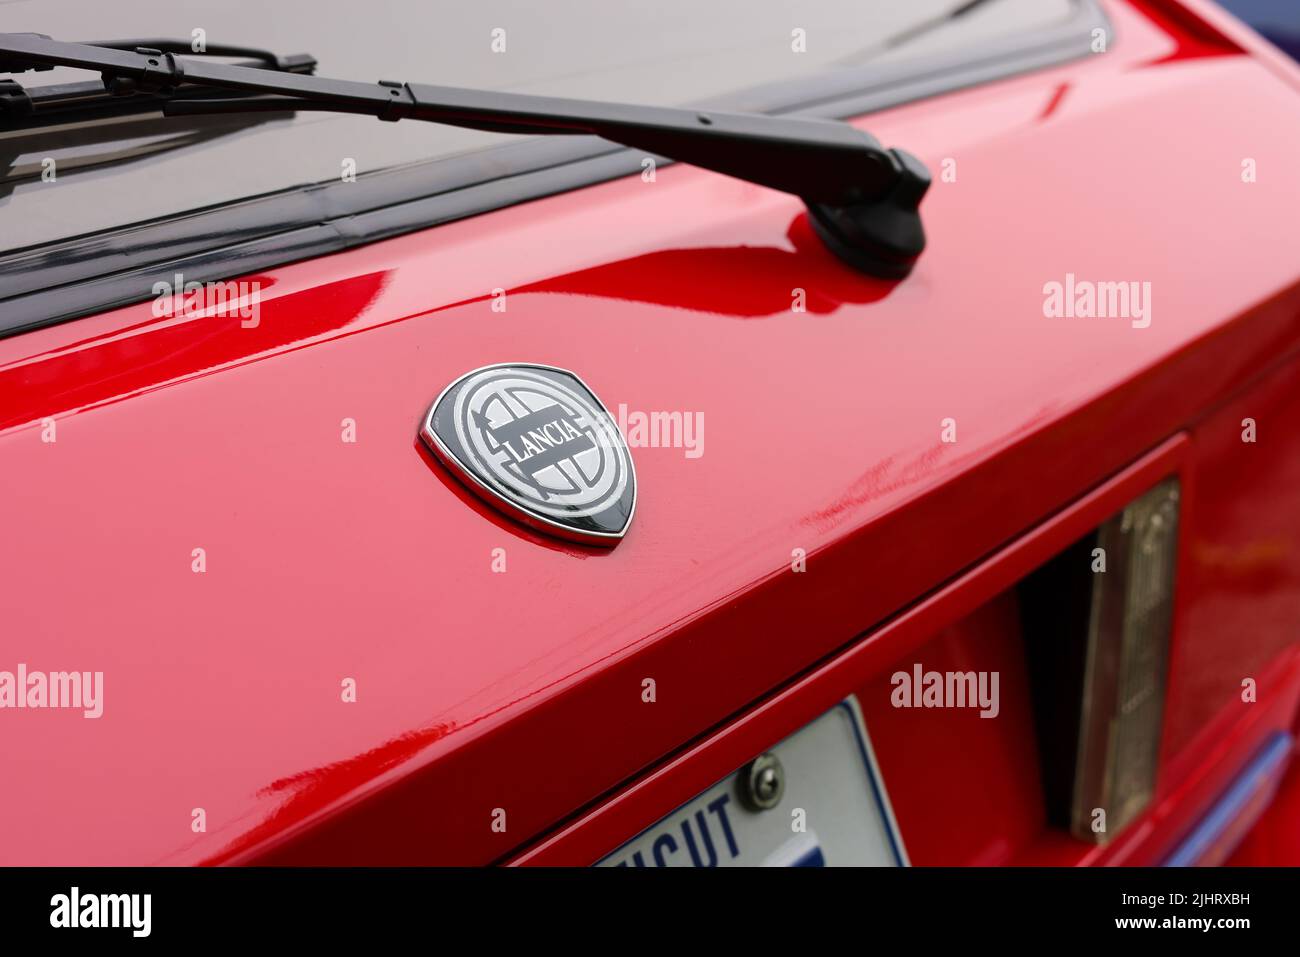 A close-up of a black and white Lancia badge on a red car Stock Photo